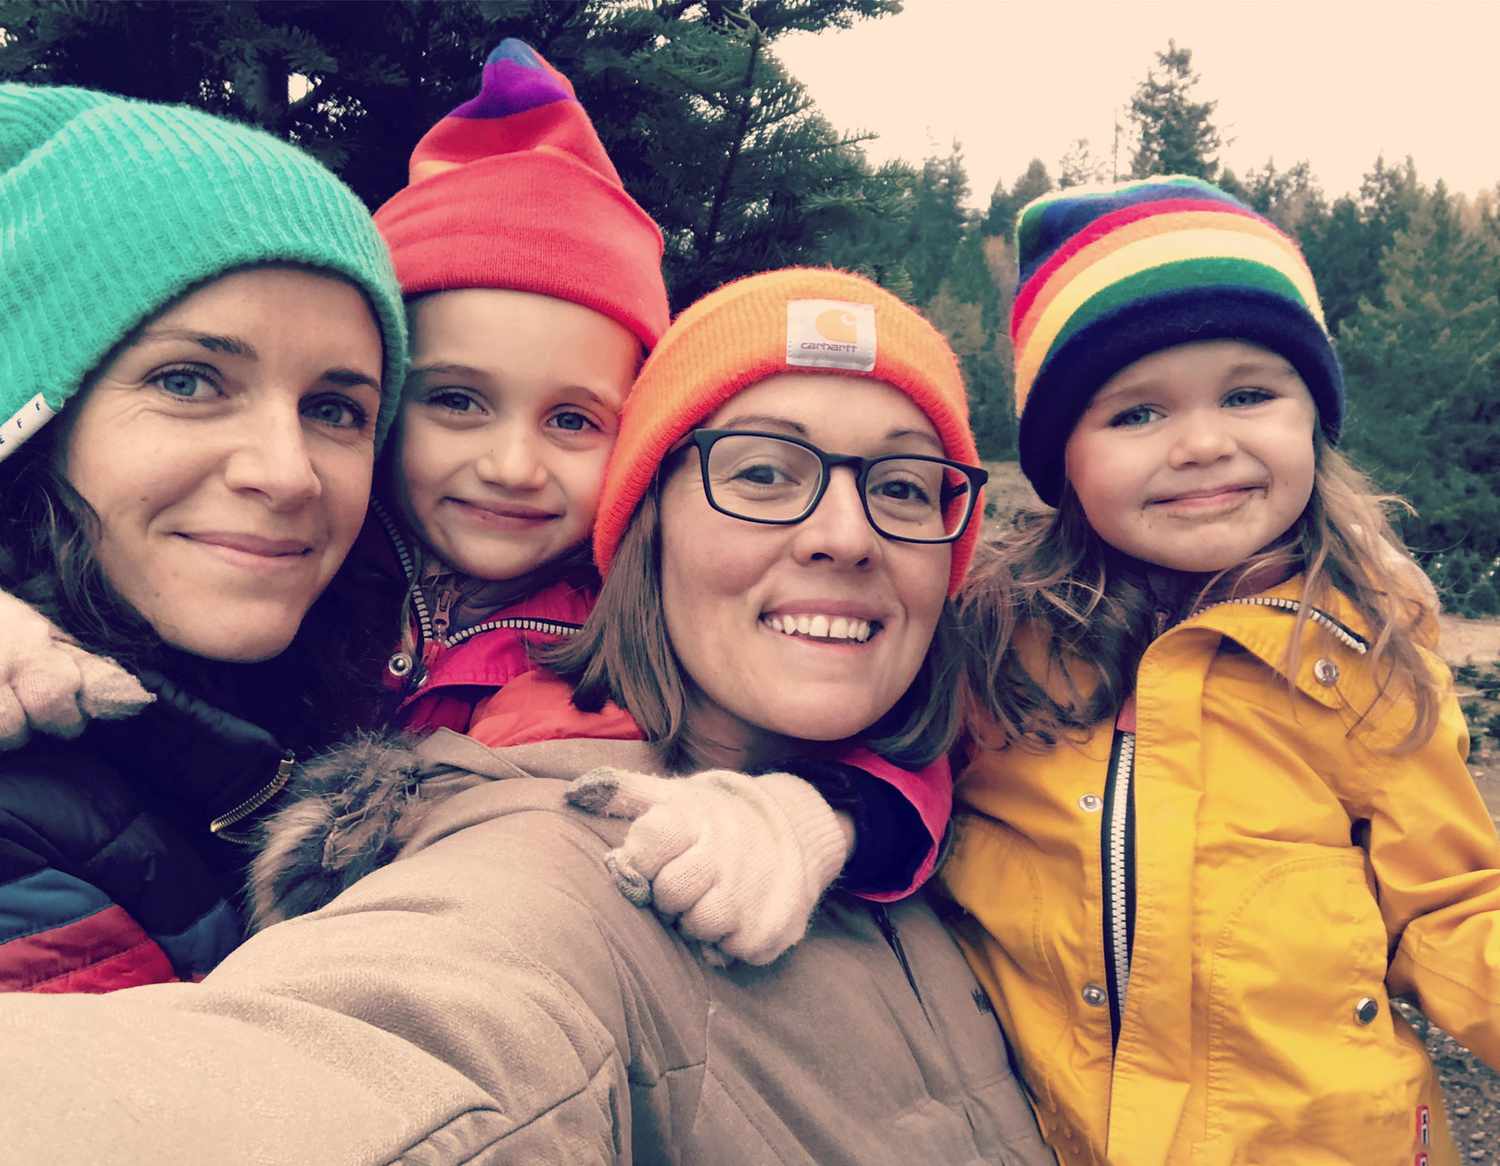 family selfie in colorful hats